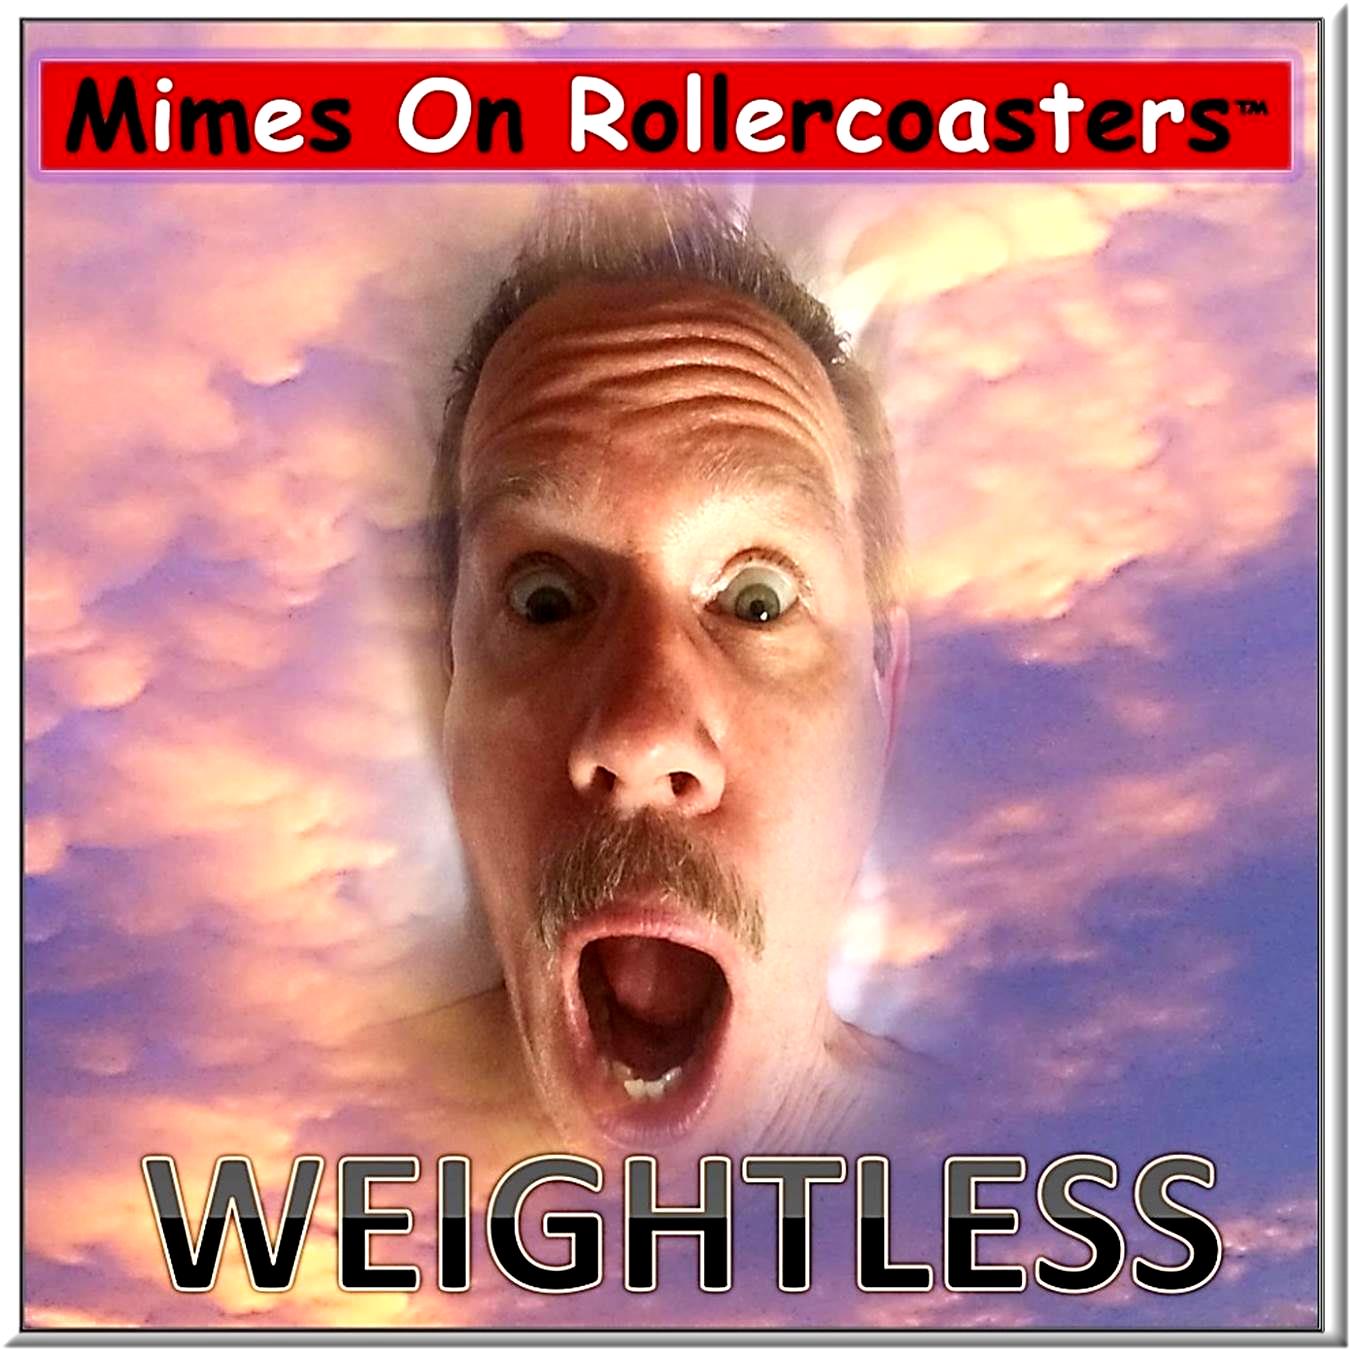 Mimes On Rollercoasters™ - Weightless (Single)